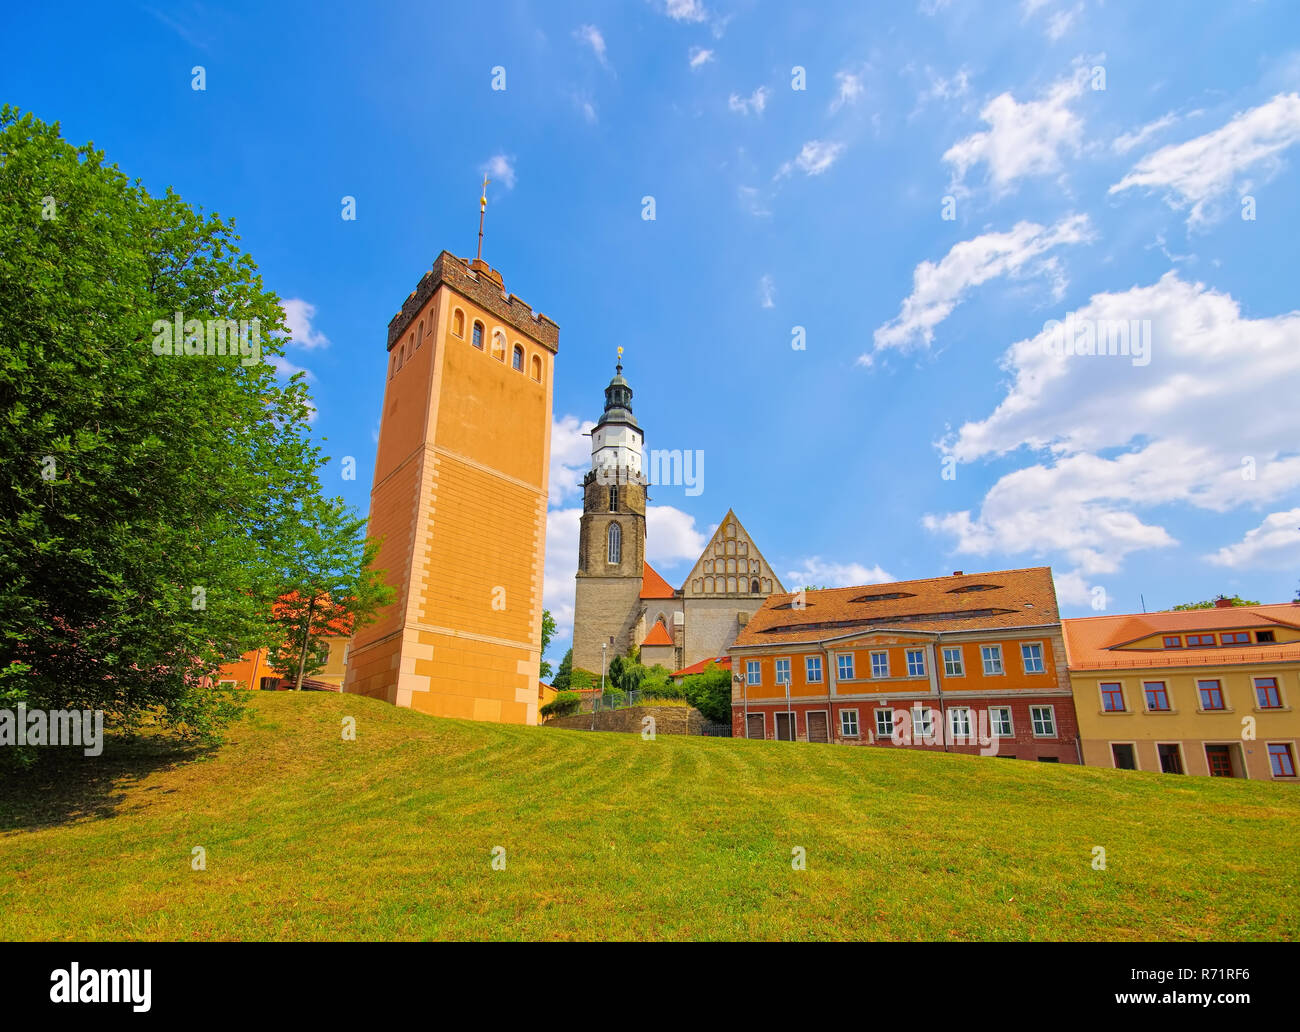 Kamenz red tower and church, Saxony in Germany Stock Photo